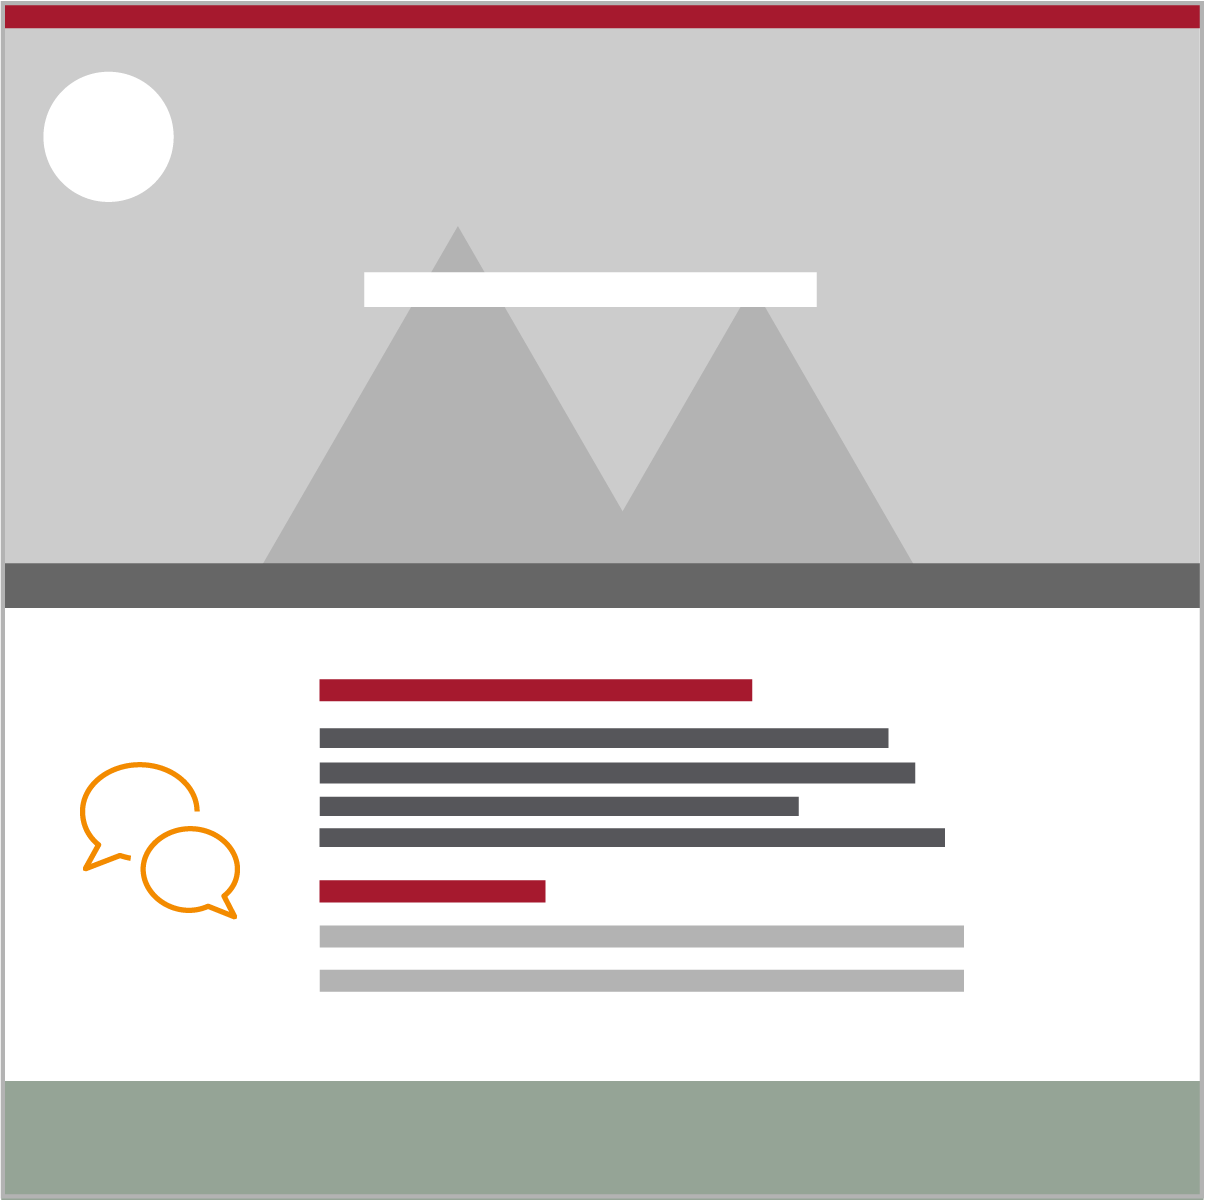 webpage design preview shows thin red header followed by a wide hero image of cartoon mountains with an overlay of a white circle and white block for header text, followed by a light gray divider line, followed by a cartoon chat box icon on the left with text aligned on its right with a red block, four light gray blocks, blue block and two light gray blocks for subheading text, followed by a green footer. | Cornell